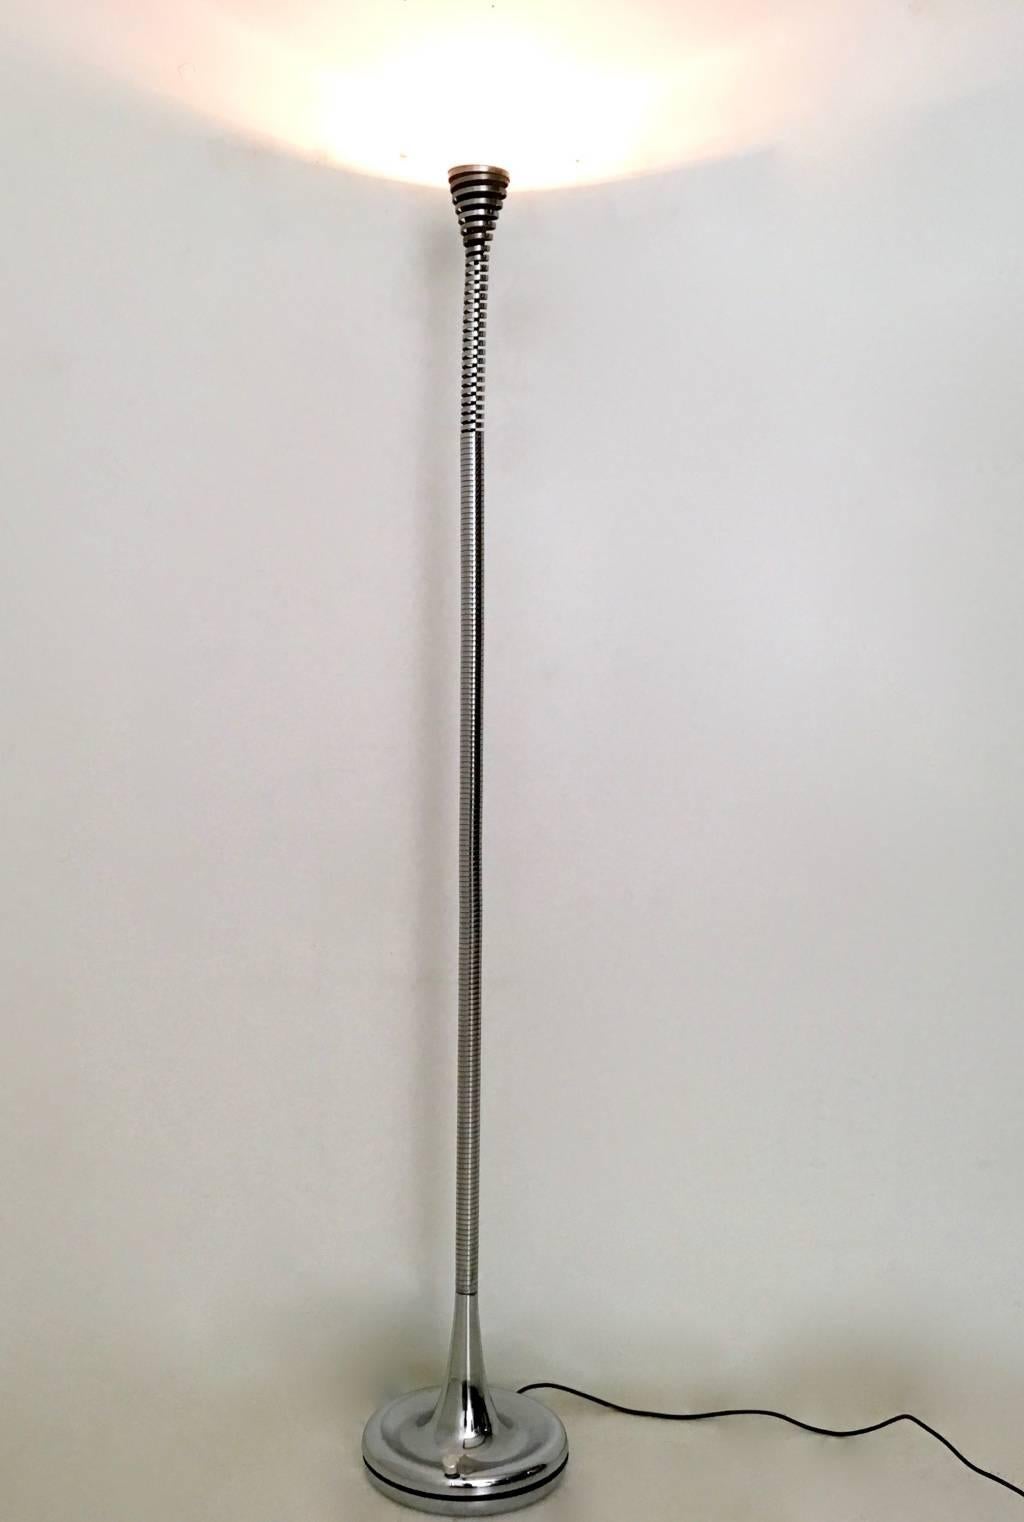 Made in Italy, 1970s.
This floor lamp features a steel stem with a spring design.
It is a vintage piece, therefore it might show slight traces of use, but it can be considered as in excellent original condition and ready to give a beautiful ambiance